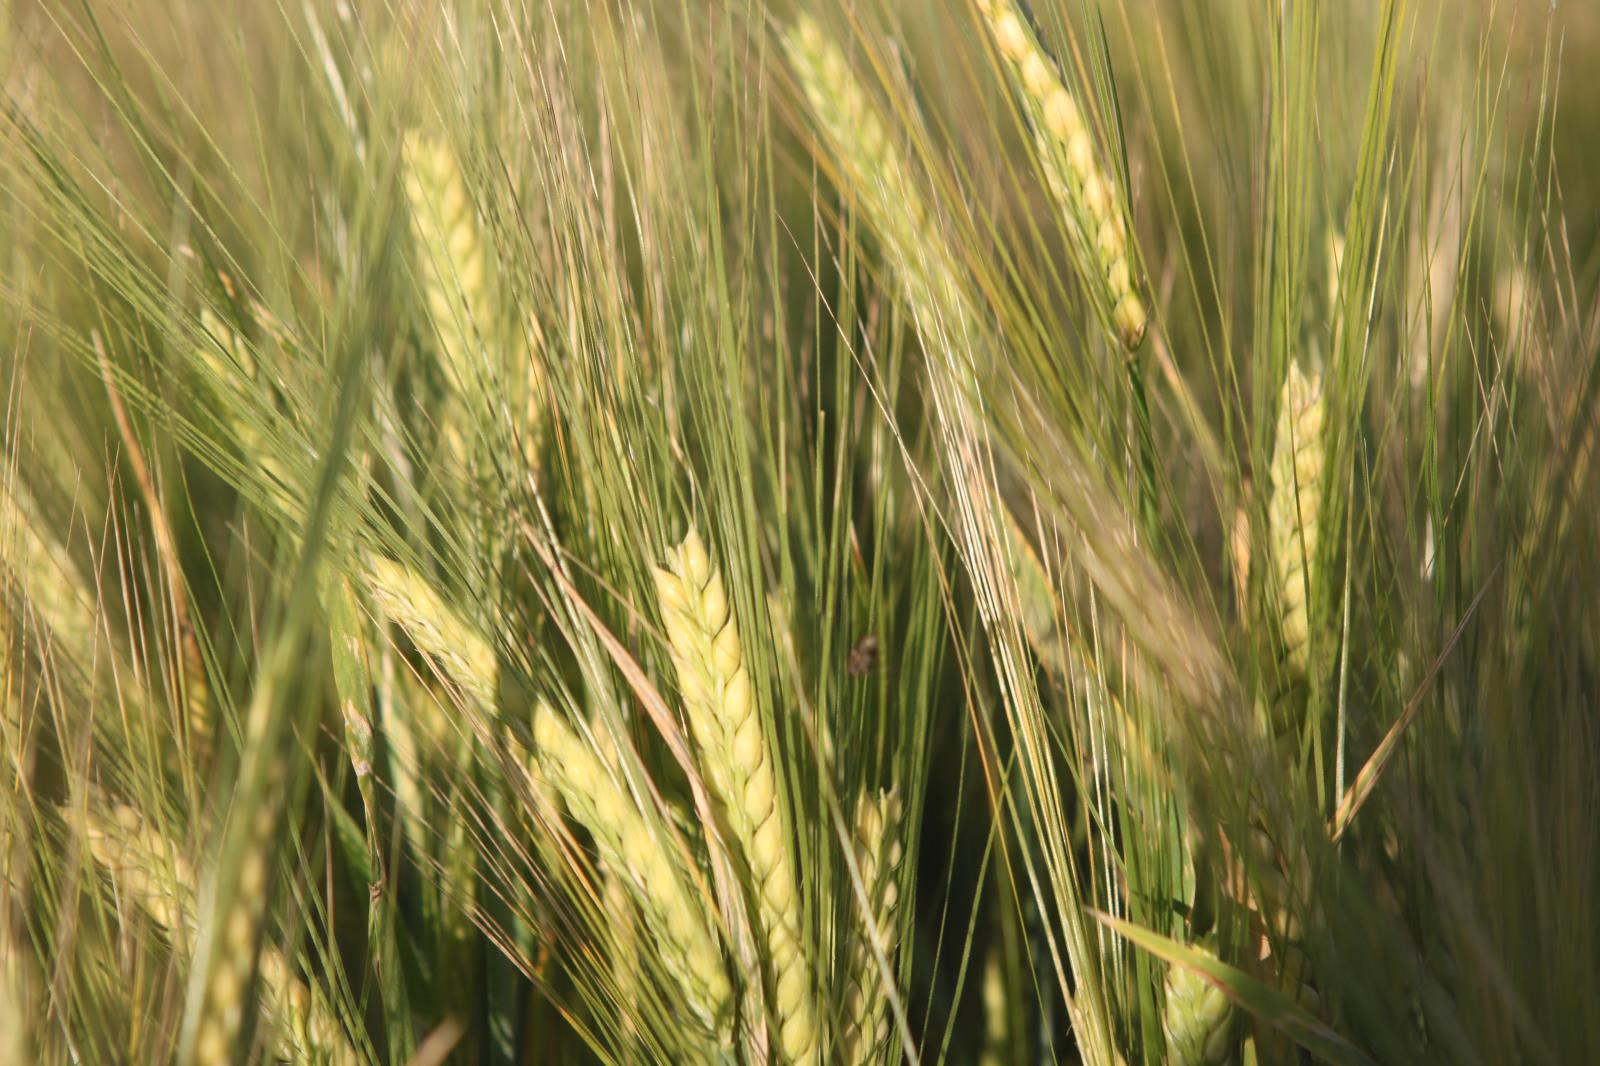 A barley field in East Idaho is shown in this file photo. Scoular Co. has announced it will build a $13 million barley manufacturing facility that will initially process 1.9 million bushels of barley annually.